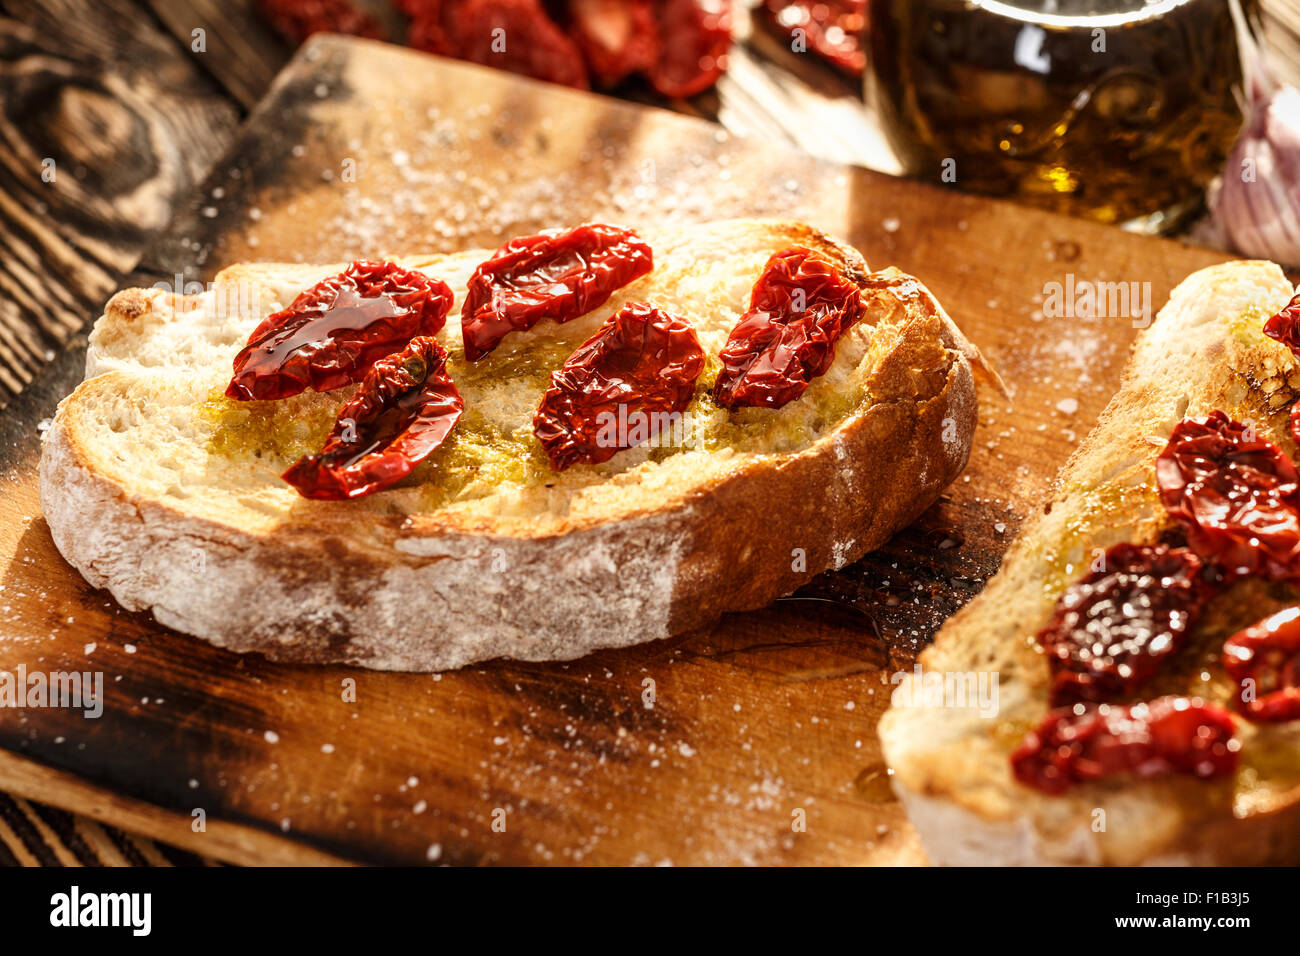 Bruschetta with dried tomatoes, garlic and olive oil. Traditional Italian cuisine sandwich made of grilled ciabatta. Antipasti Stock Photo